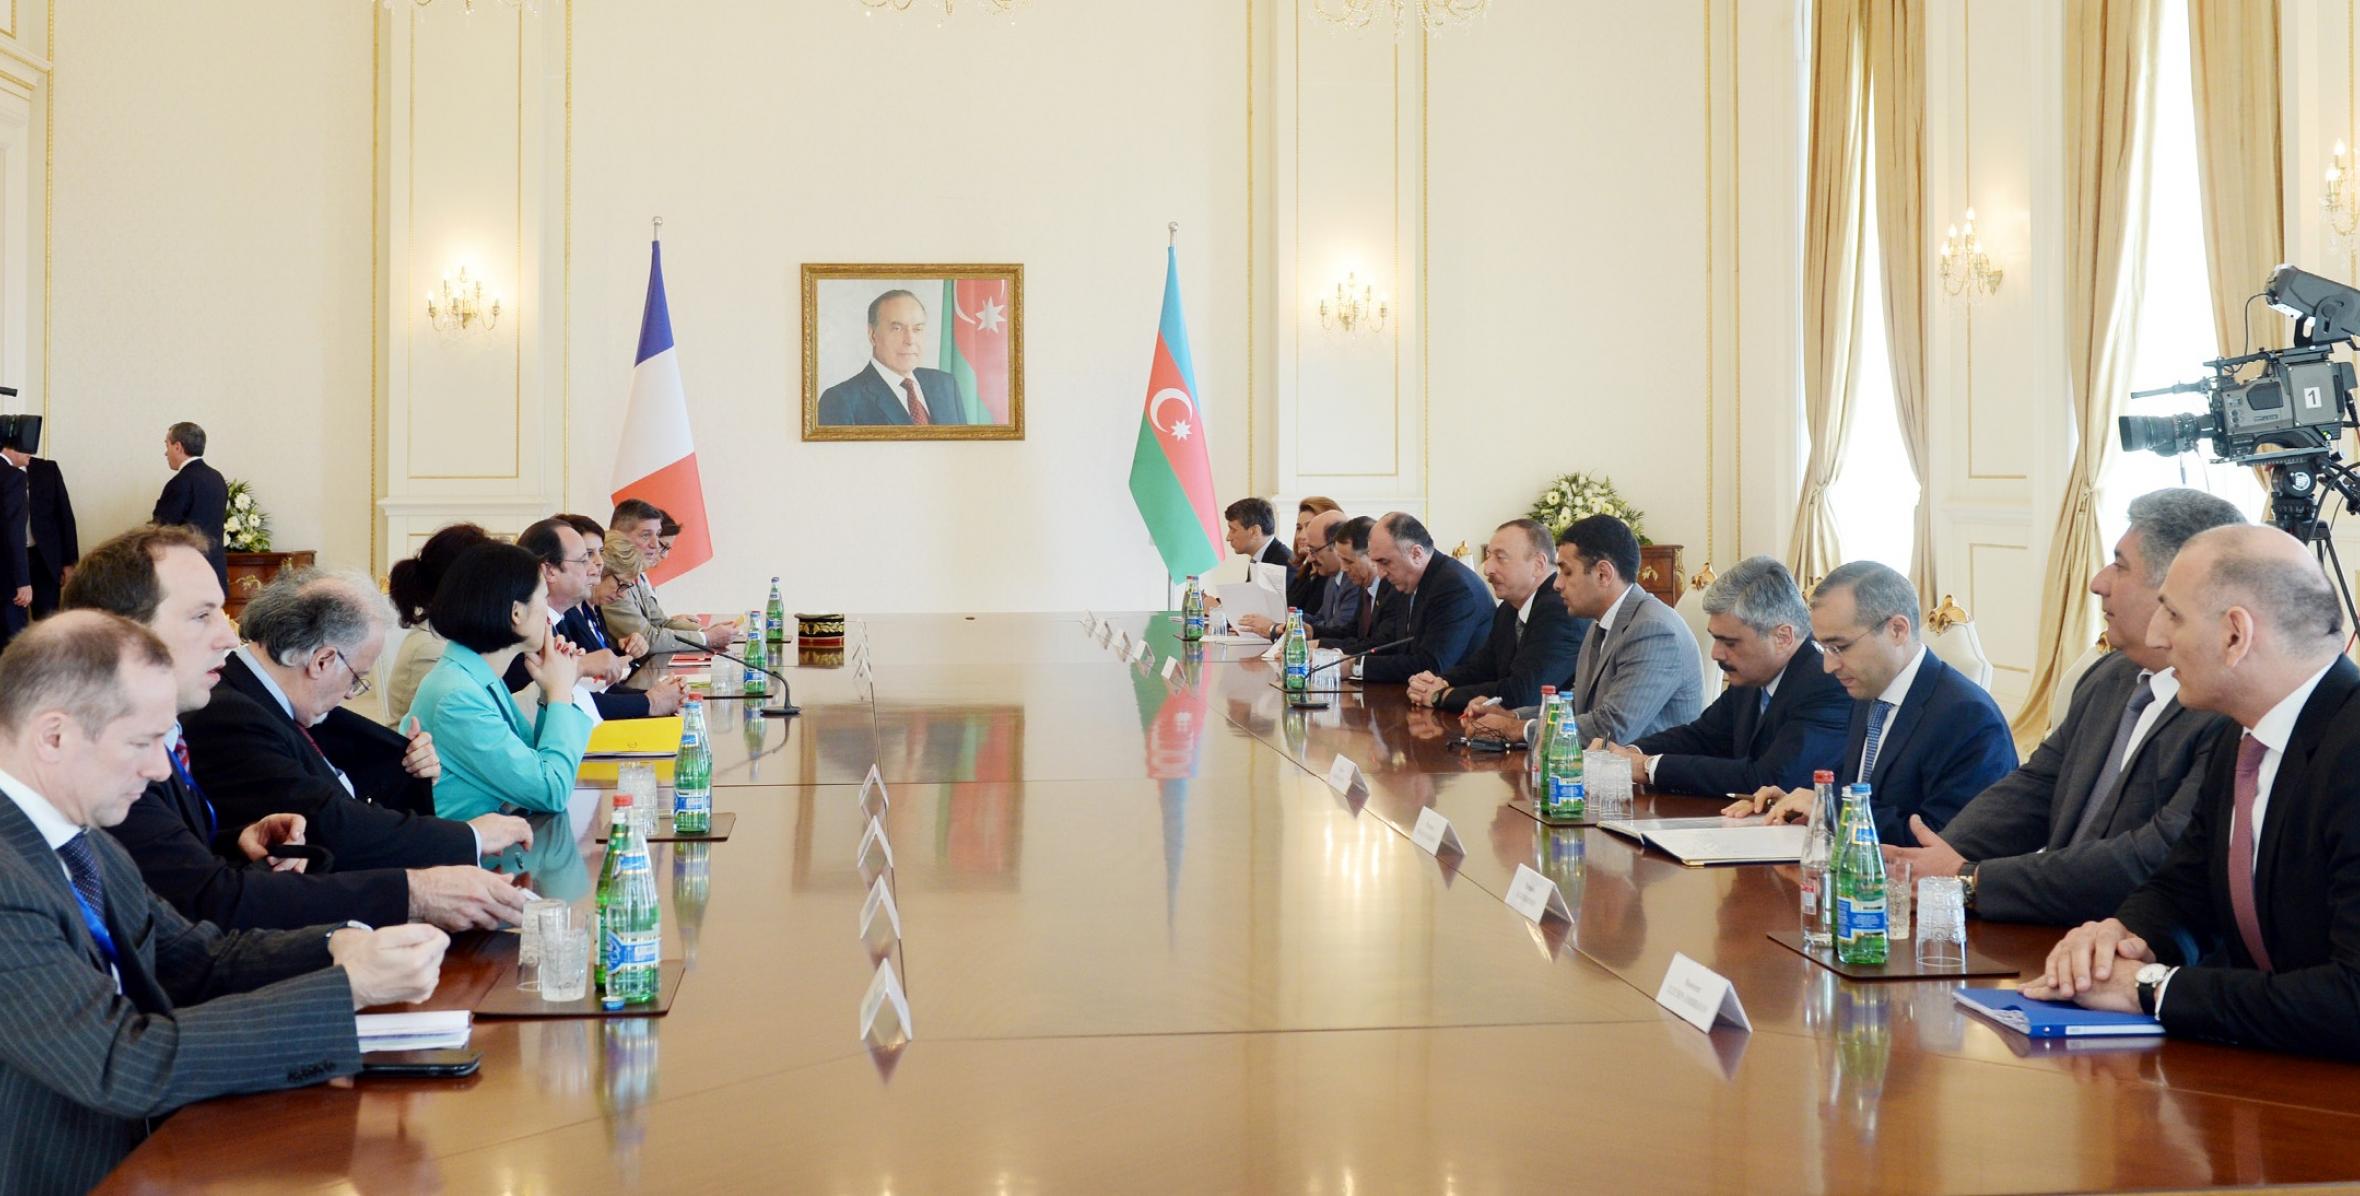 Presidents of Azerbaijan and France held a meeting in an expanded format